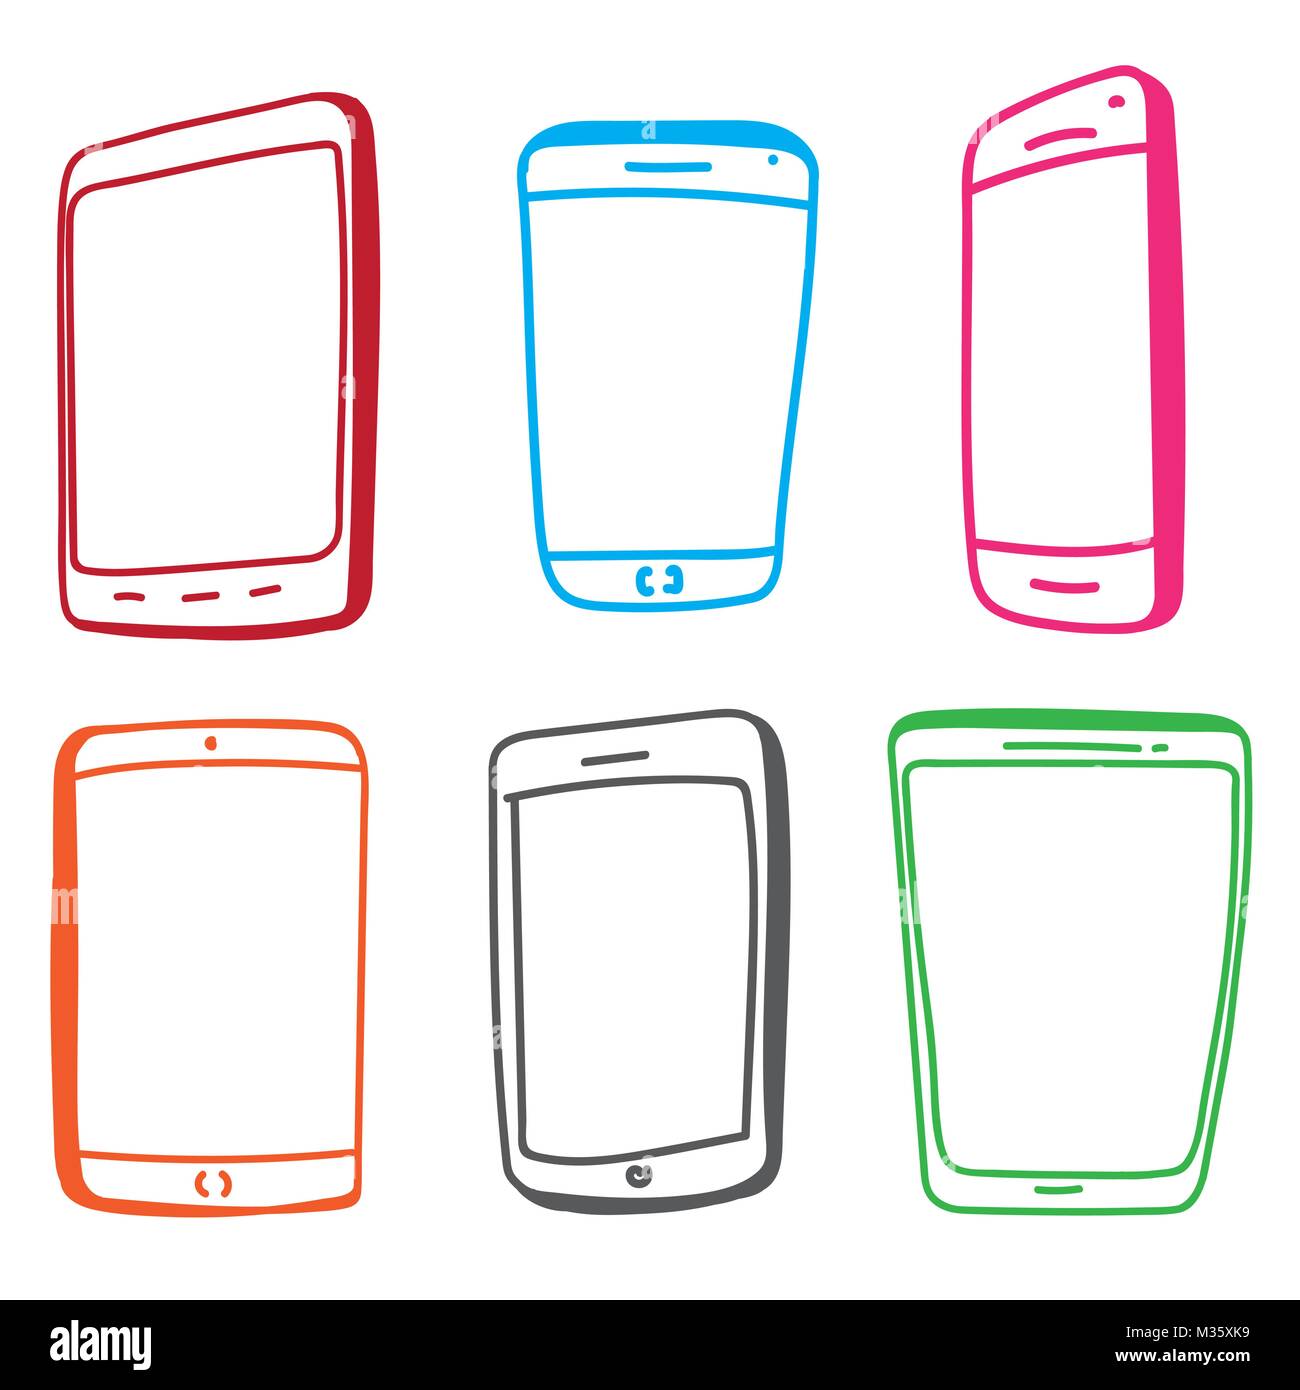 Colorful Mobile Phone and Digital Tablet Hand Drawn Vector Icon Set. Stock Vector